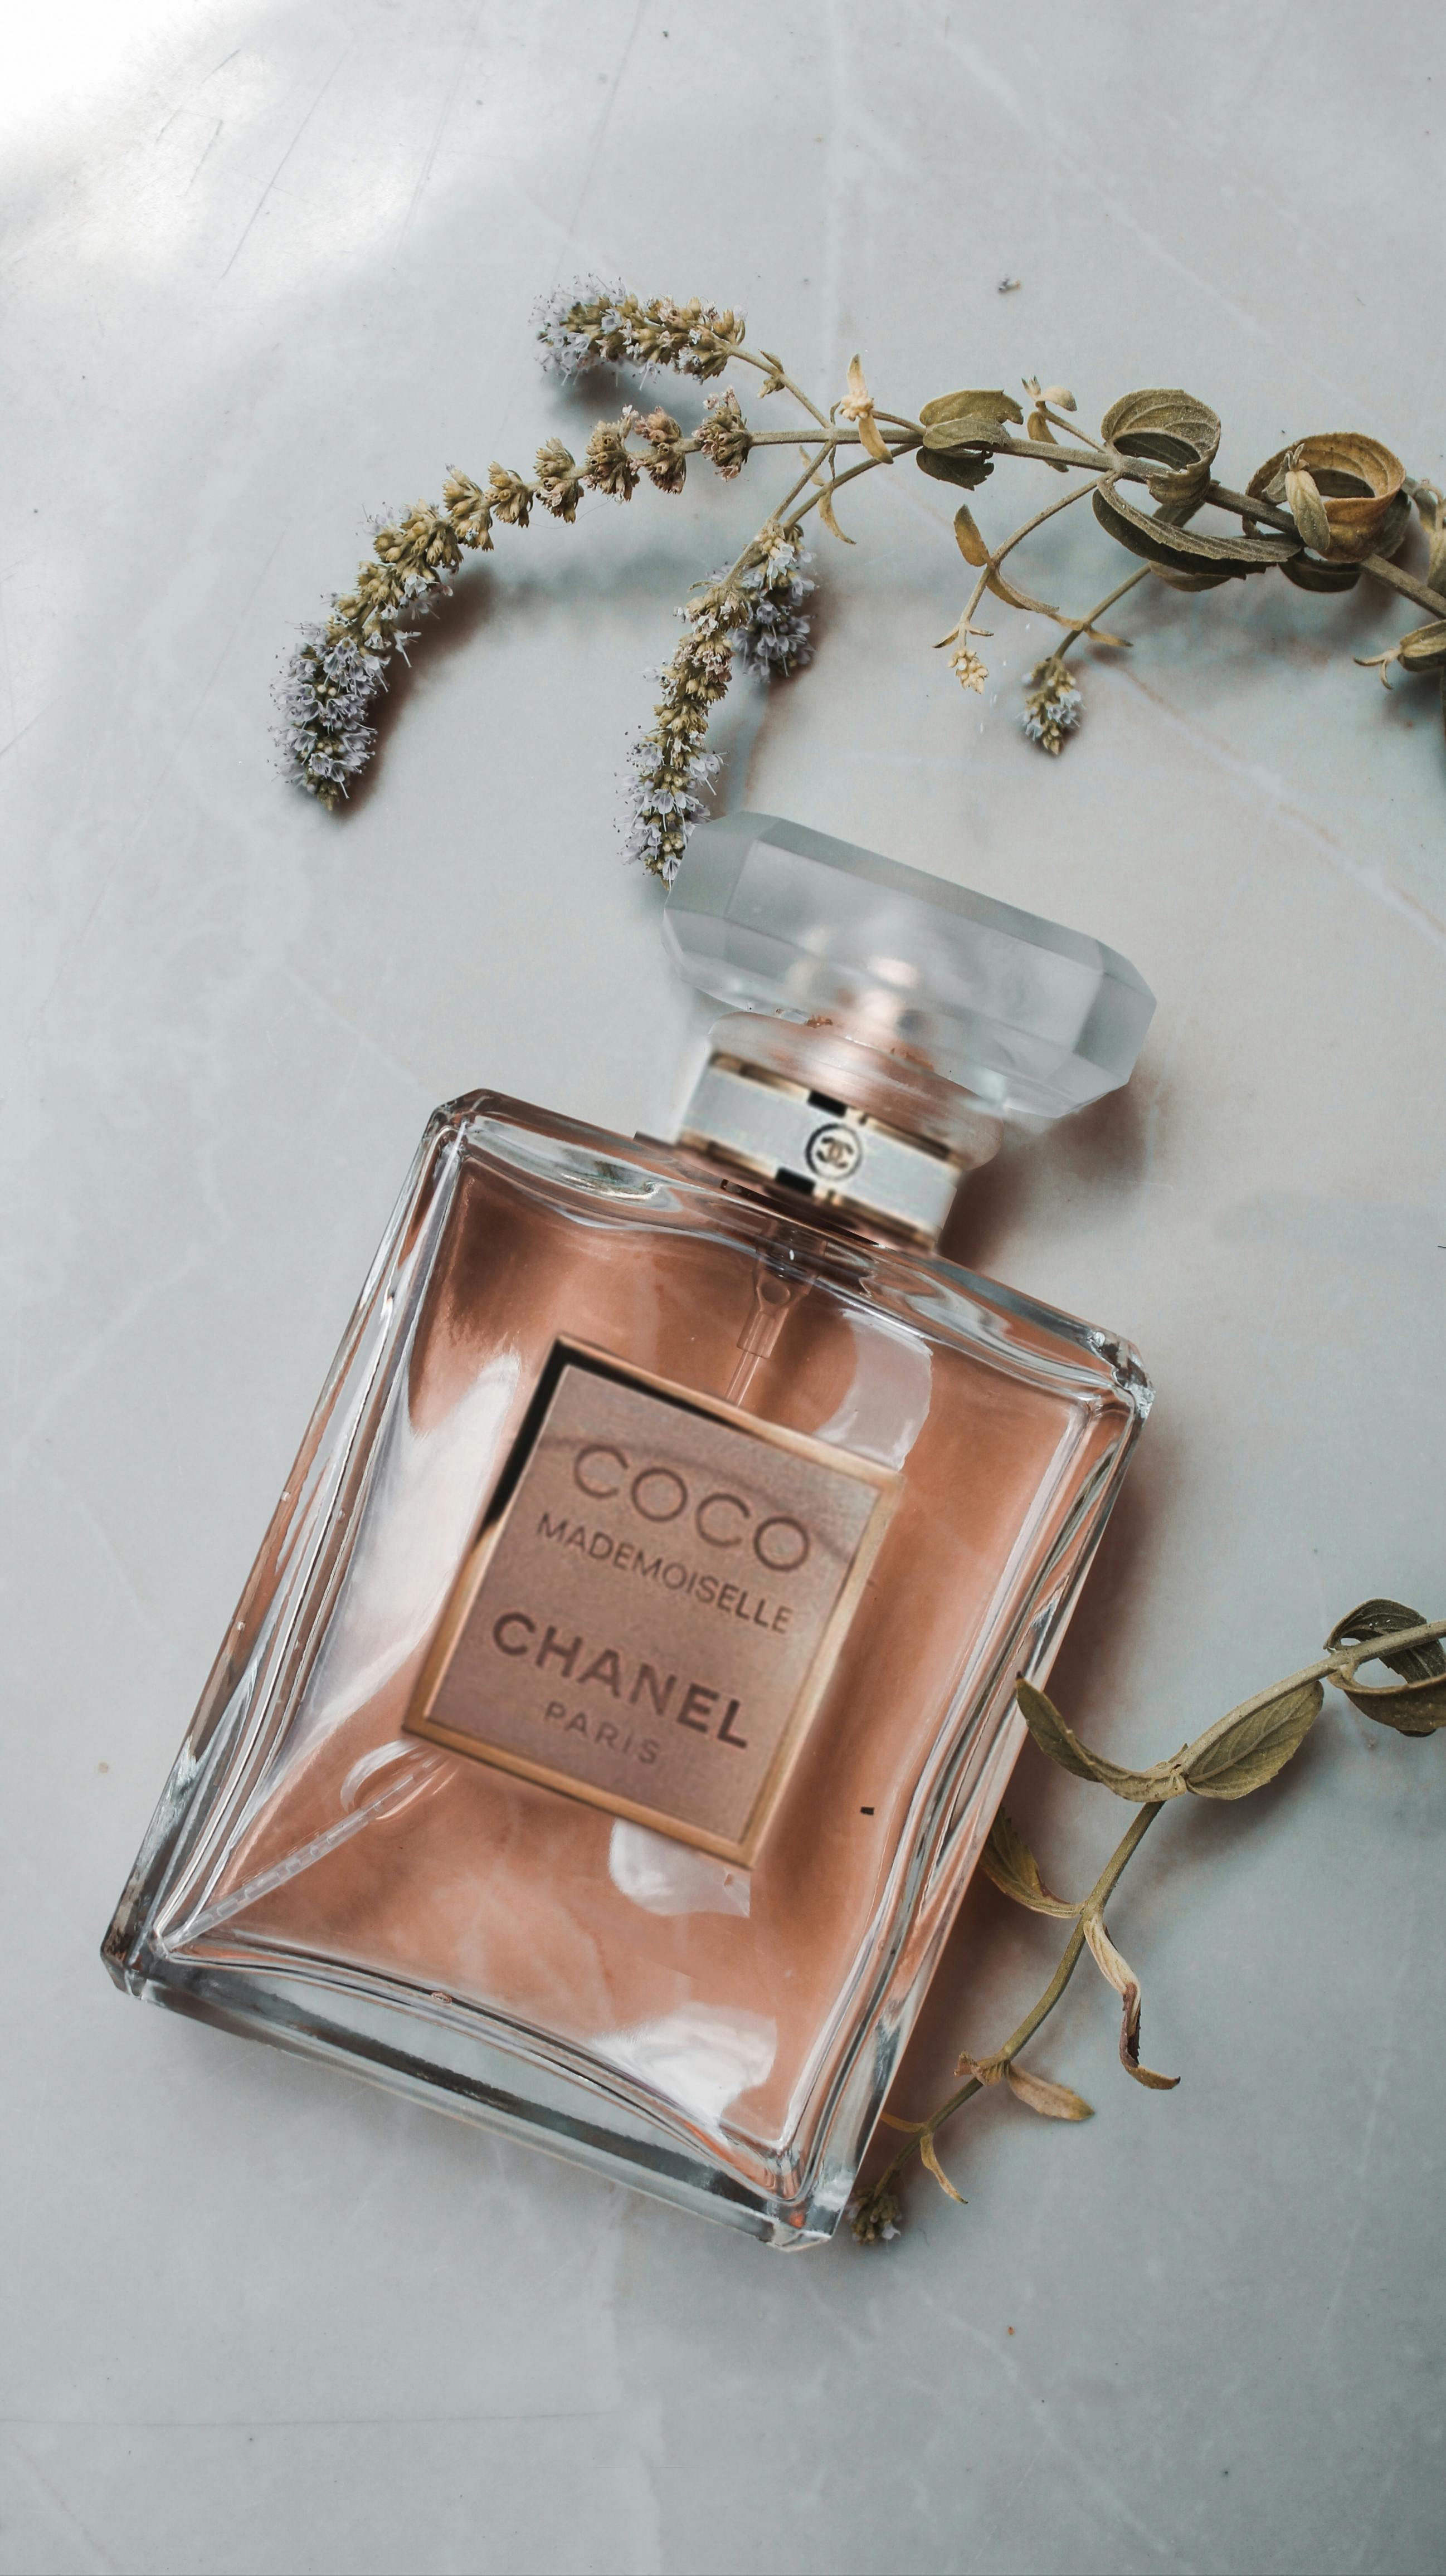 100 Perfume Pictures  Download Free Images on Unsplash